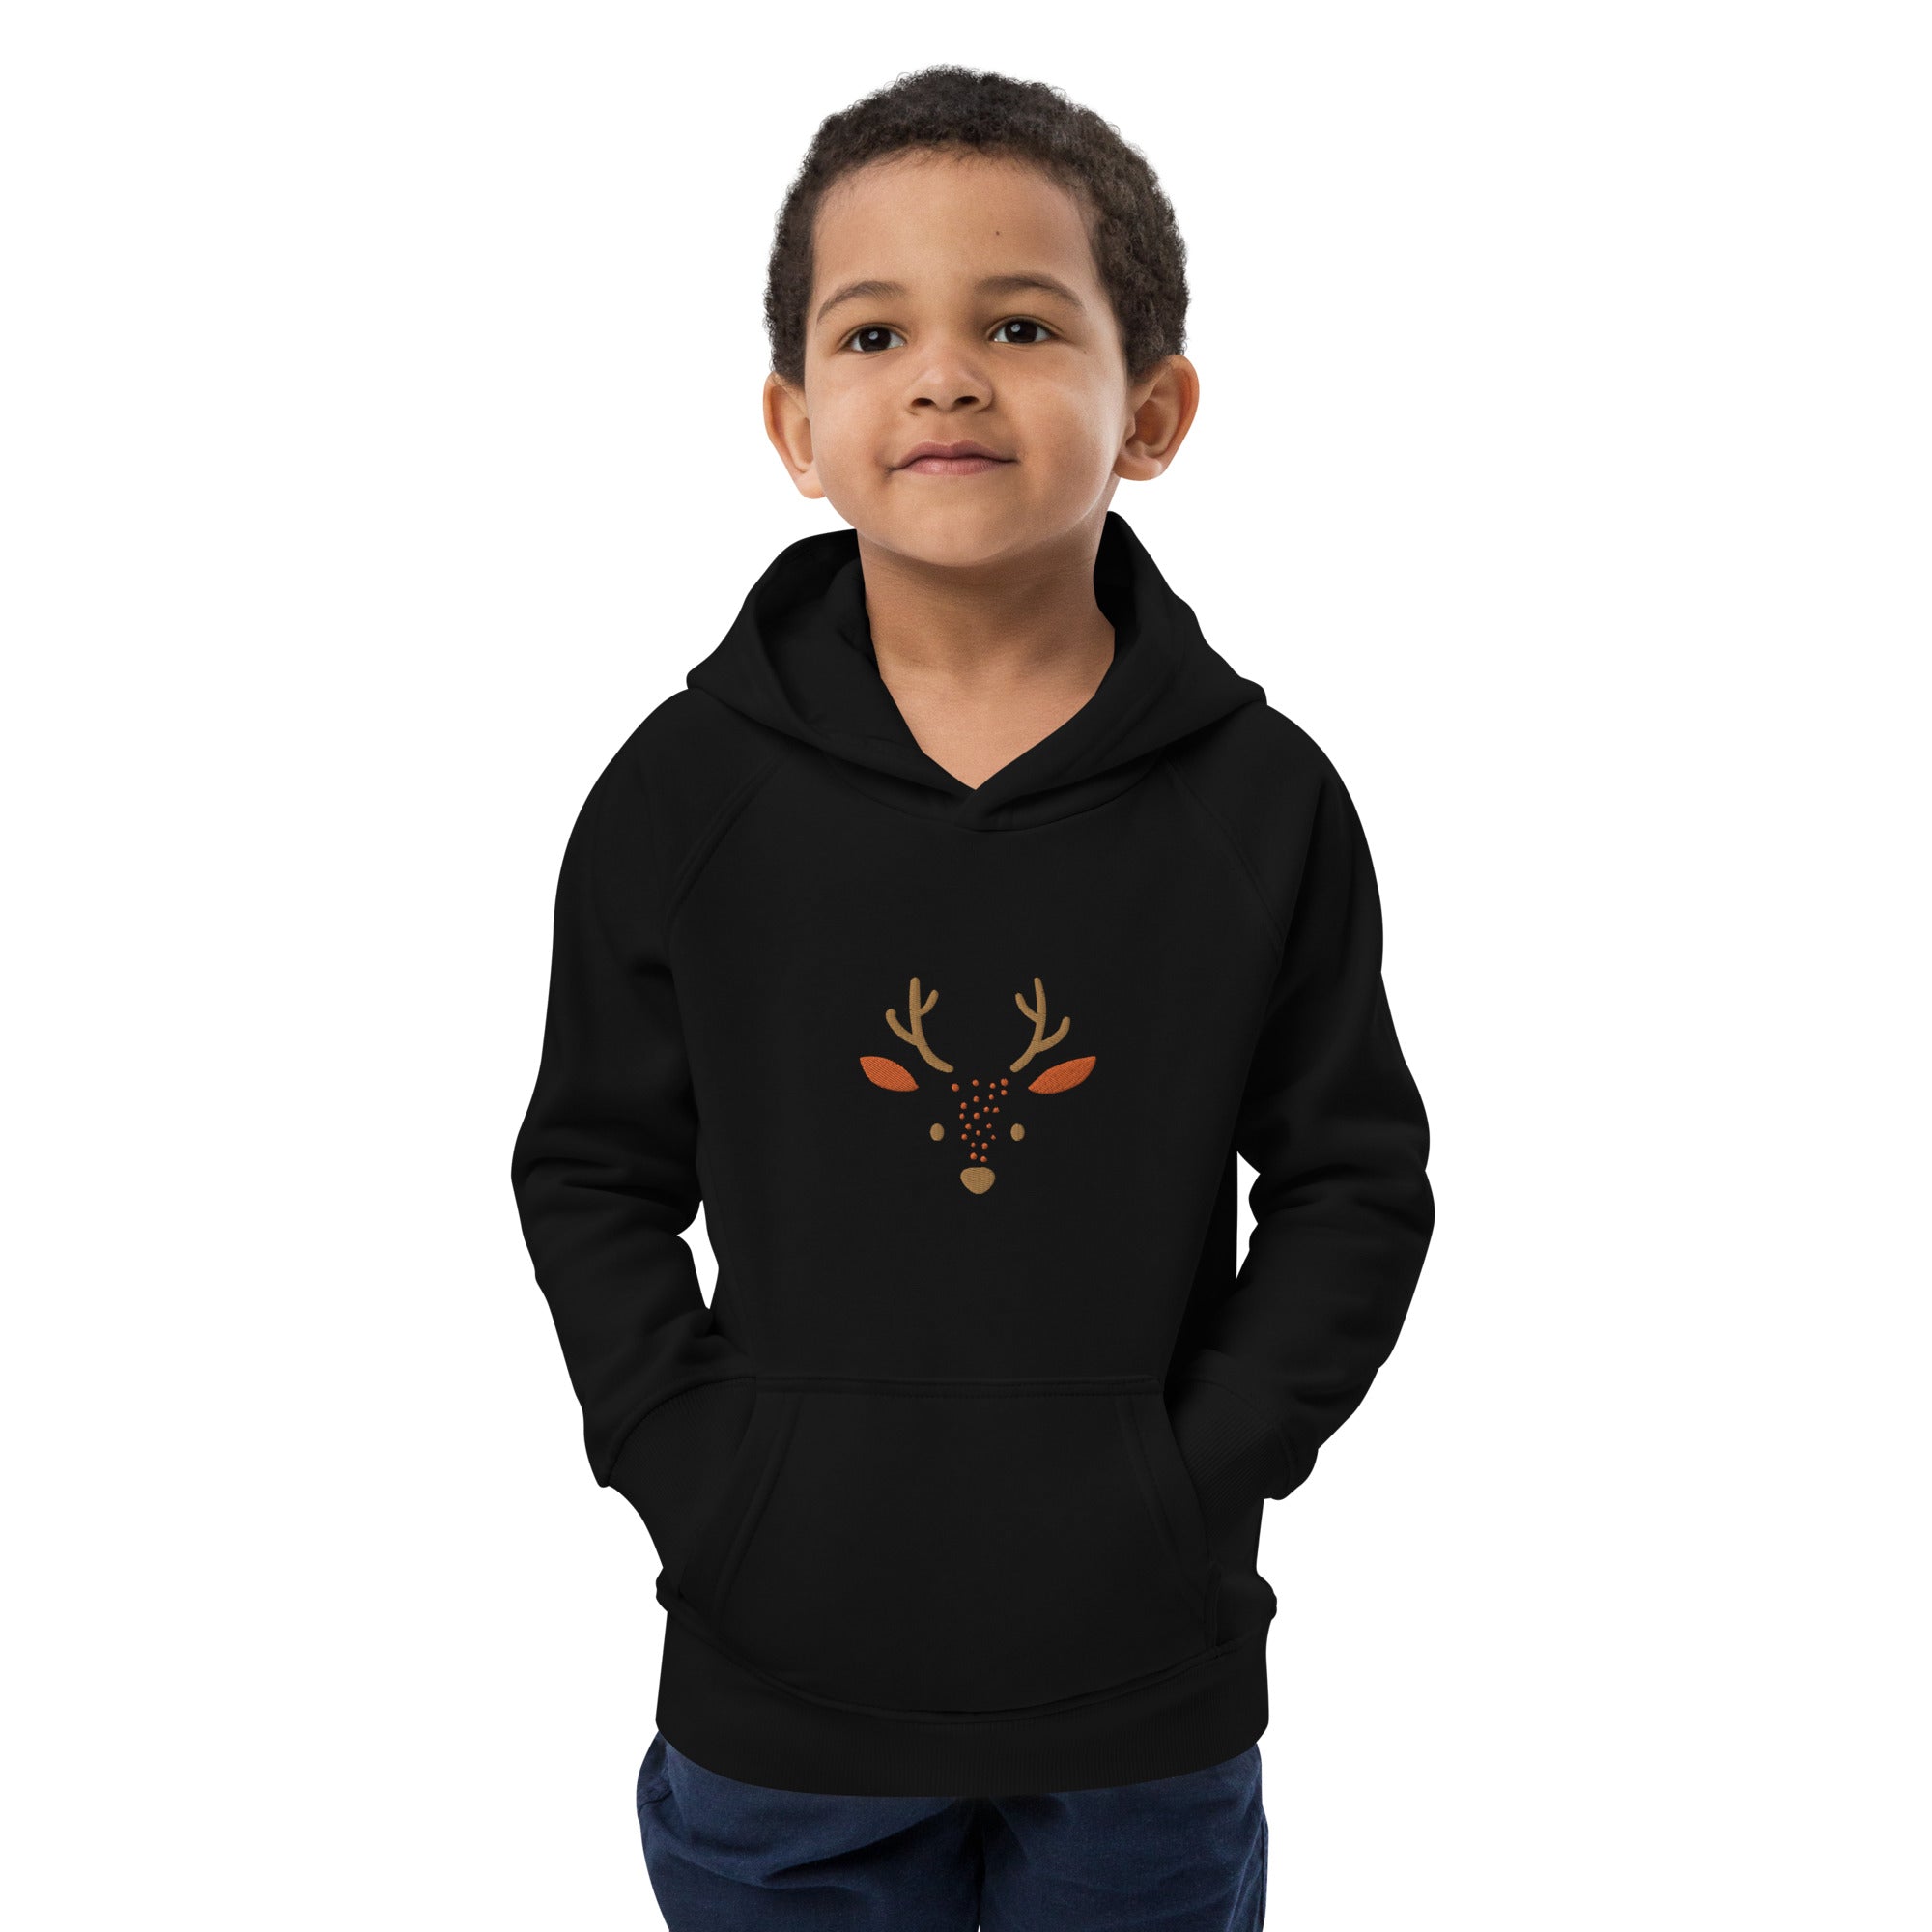 Deer 2 Kids Eco Hoodie with cute animals, Organic Cotton pullover for children, gift idea for kids, soft hoodie for kids for Christmas-5